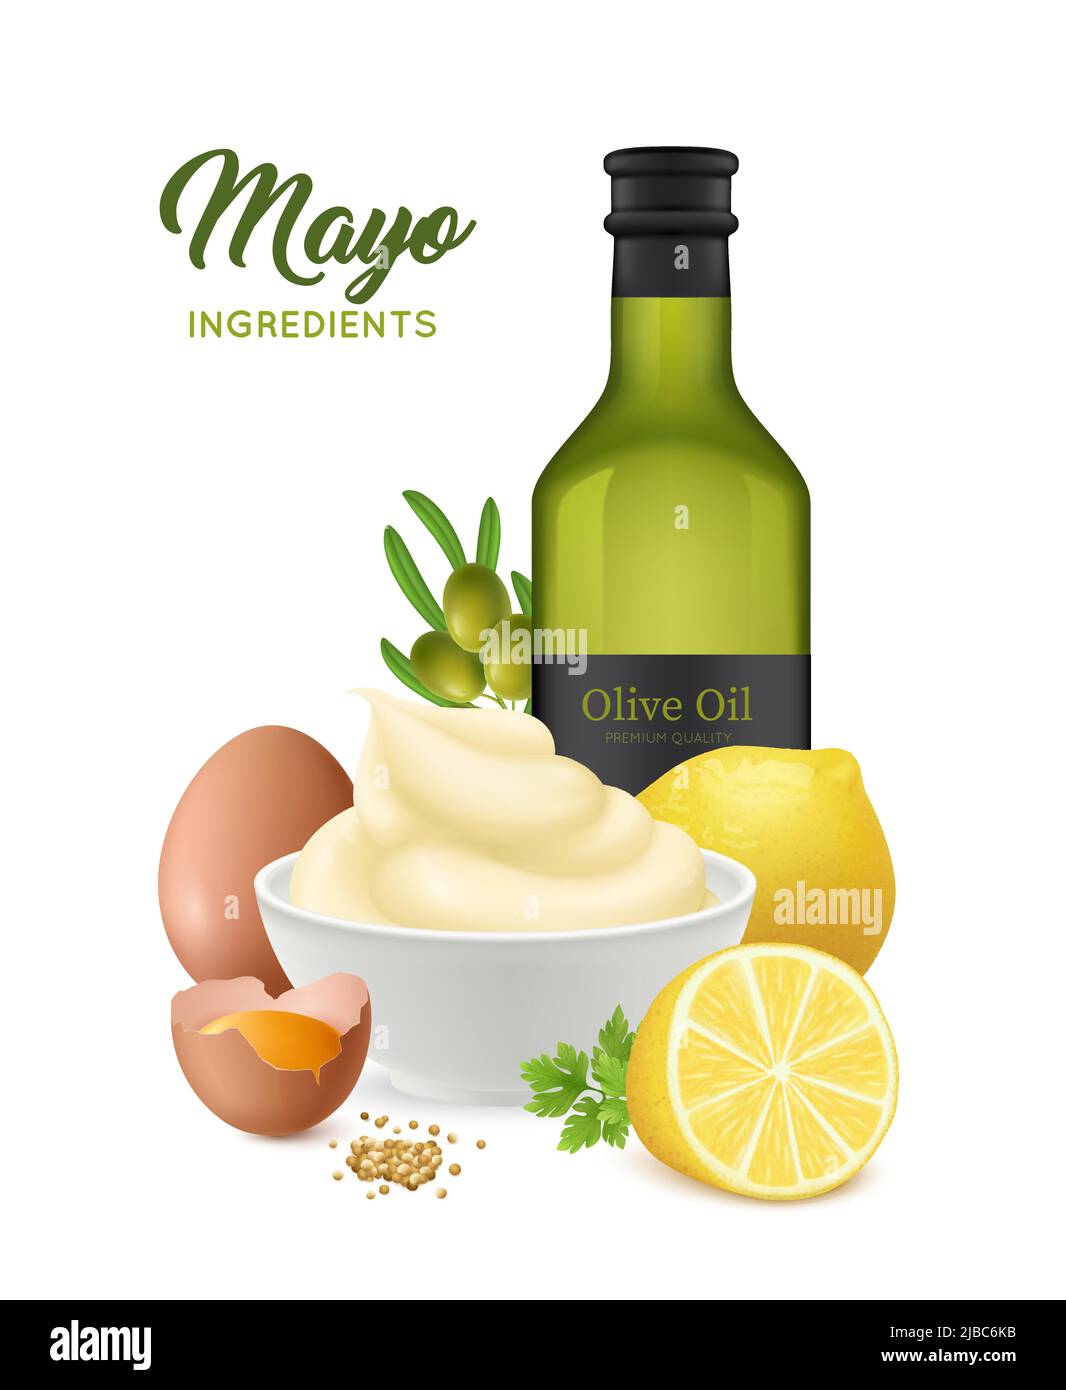 Realistic mayonnaise composition with editable ornate text and images of eggs lemons and olive oil bottle vector illustration Stock Vector